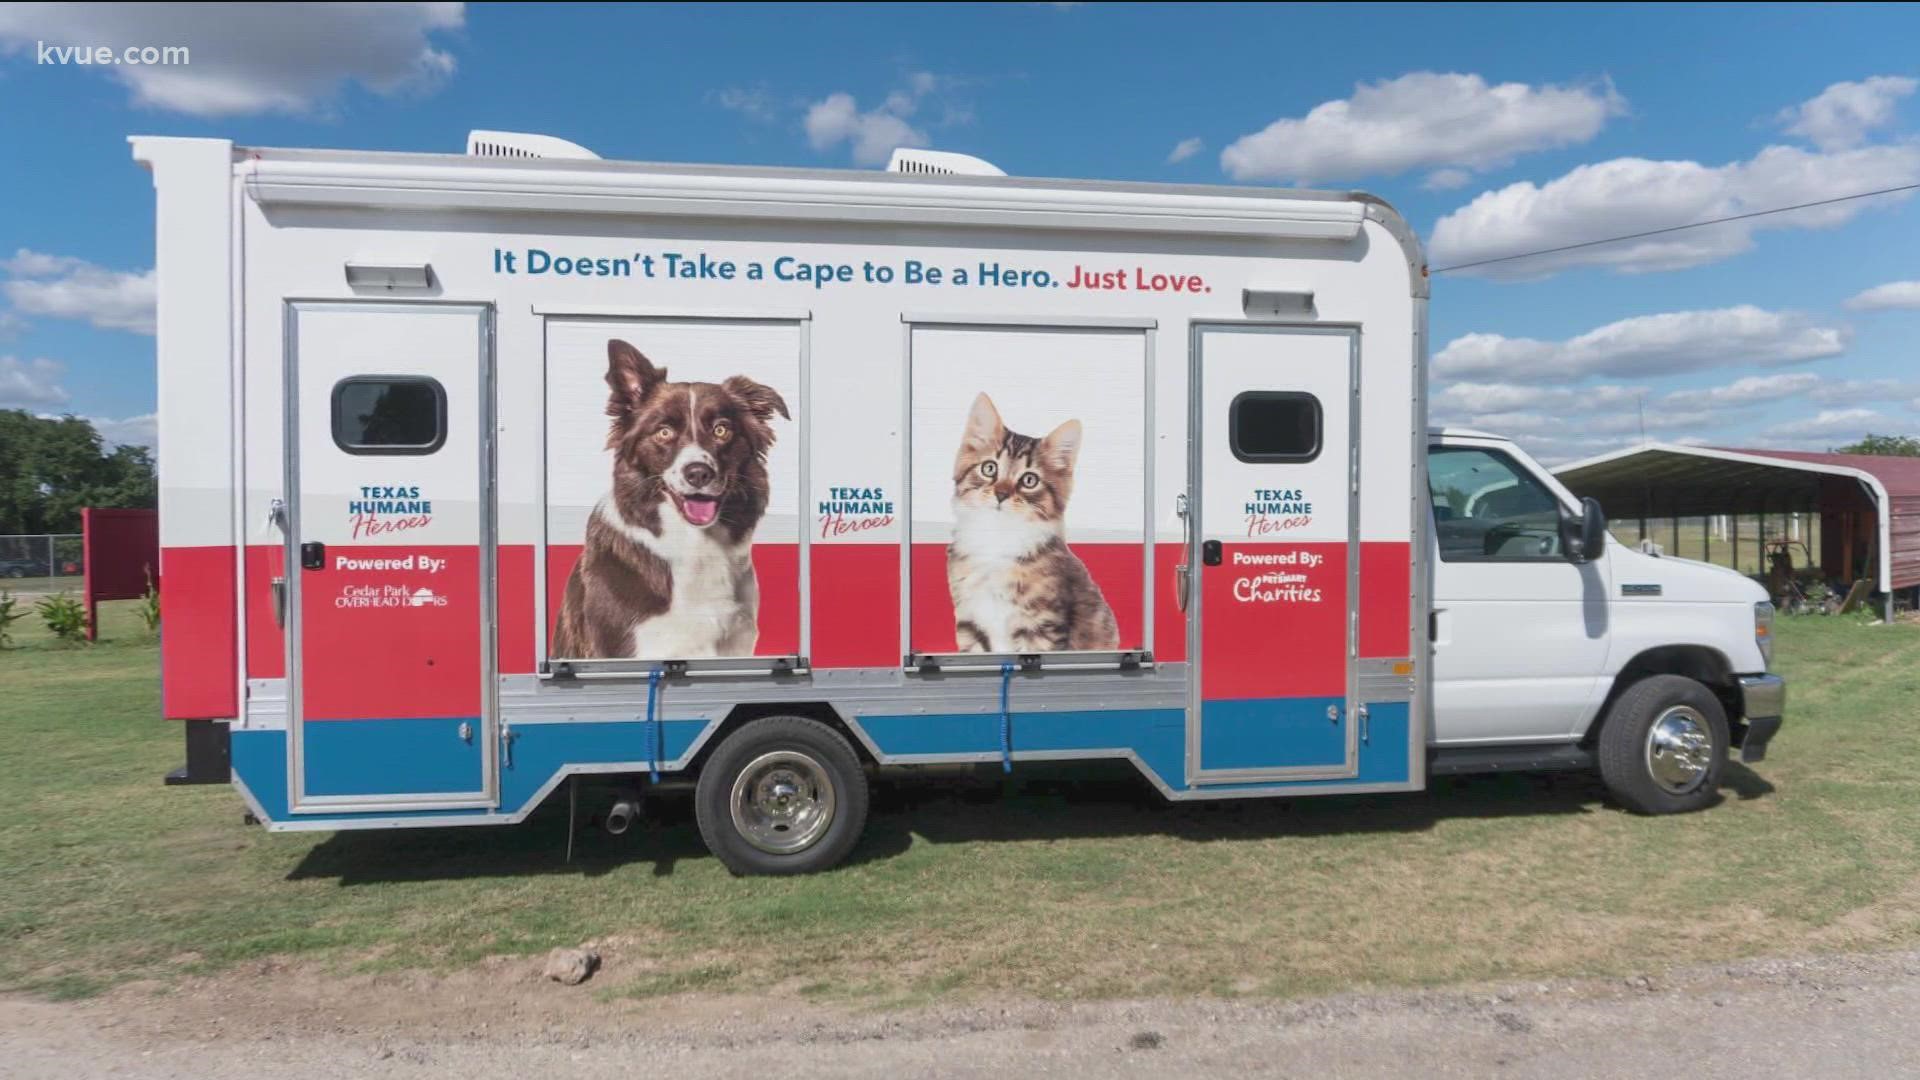 Texas Humane Heroes is rolling out a new way to get more pets adopted around Central Texas.